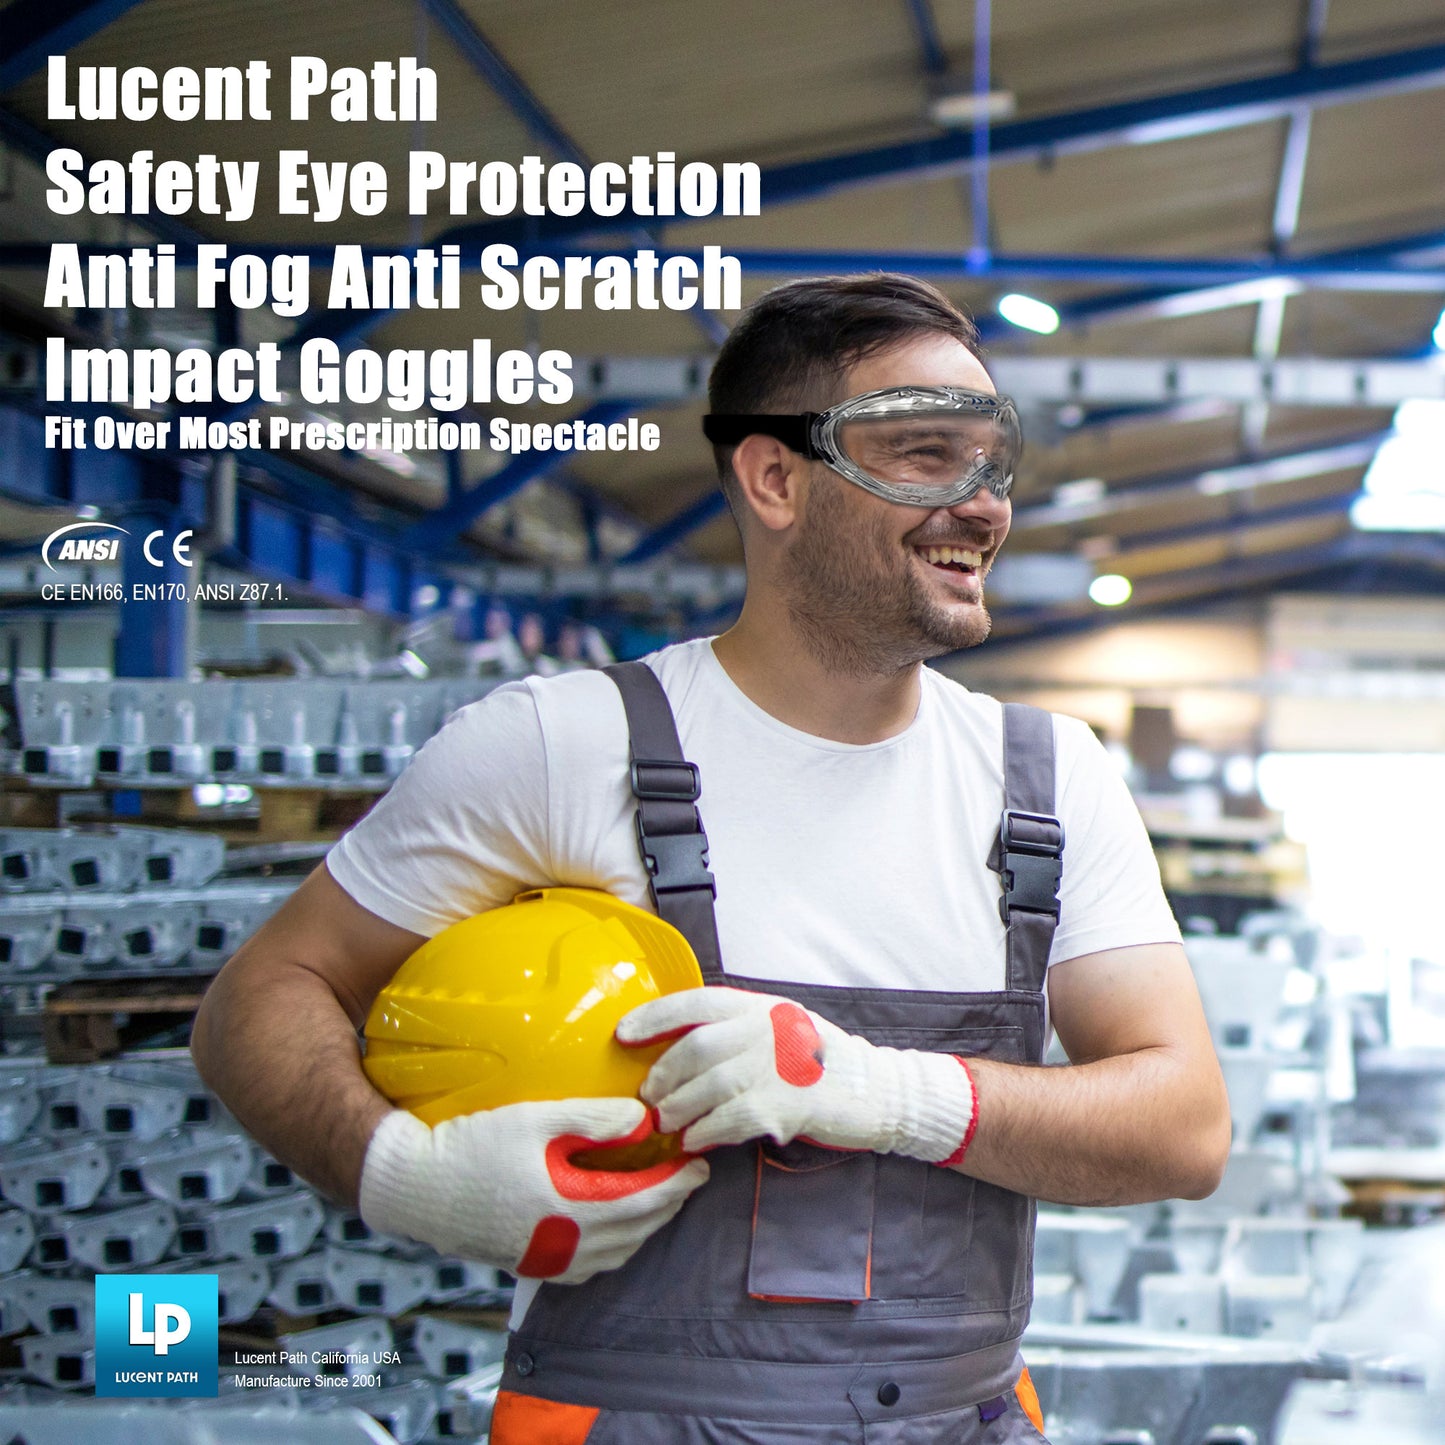 Lucent Path Safety Goggles Anti-Fog Anti-Scratch CE ANSI Certified Clear Impact Resistant Eye Protection